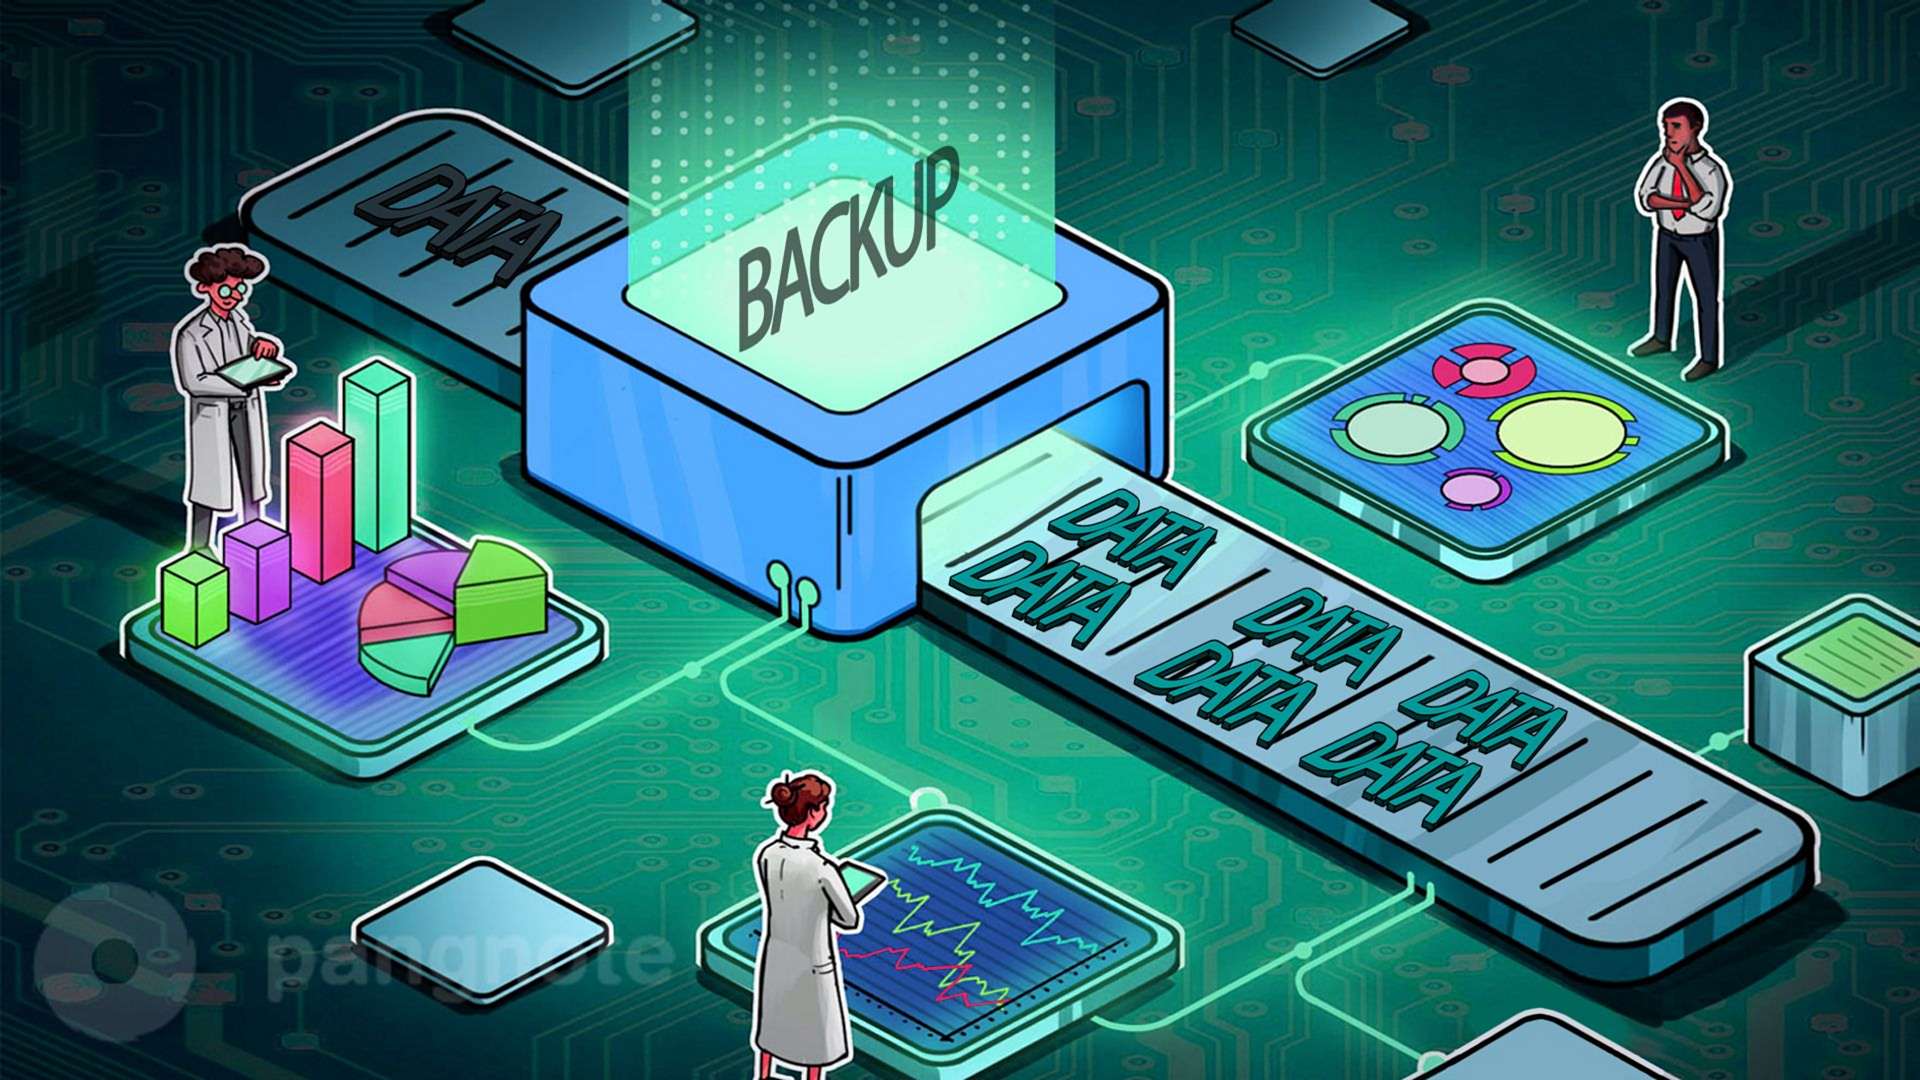 Backup as one of the most important elements in the operation of any project